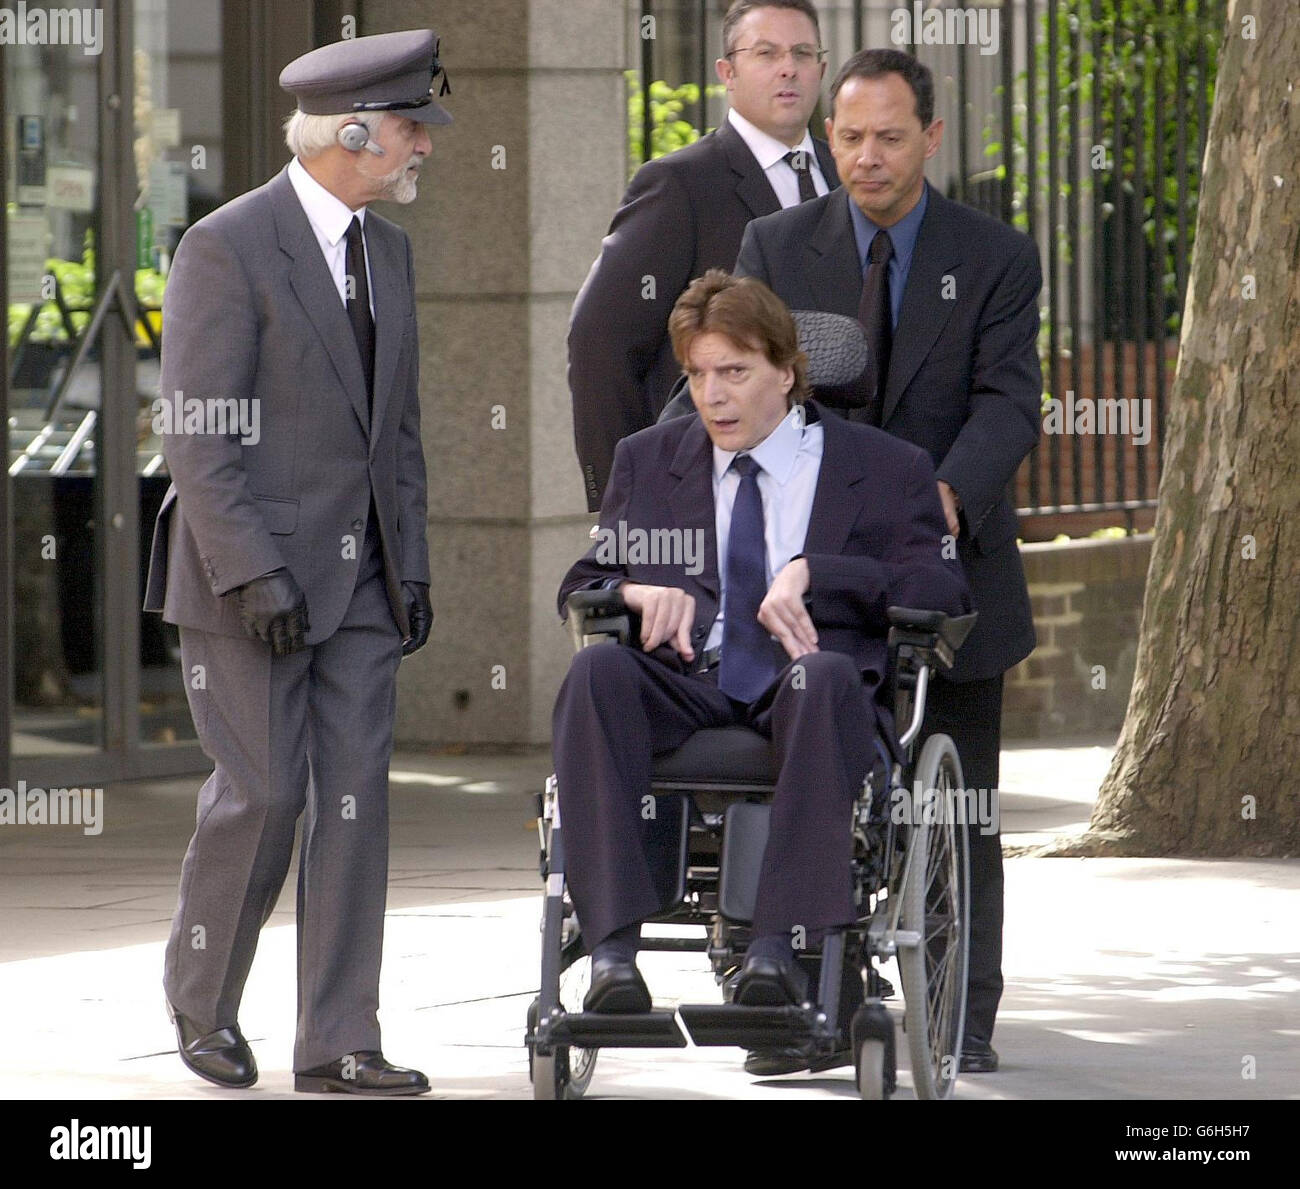 John Paul Getty III arrives at Westminster Cathedral in London for the memorial service for his father, billionaire philanthropist Paul Getty. More than 1,000 people were expected to gather to pay their respects to the man who once said 'as long as I have money, I will give it away'. Sir Paul, whose wealth derived from his family s oil fortune, died in hospital in April aged 70 while being treated for a chest infection. Stock Photo